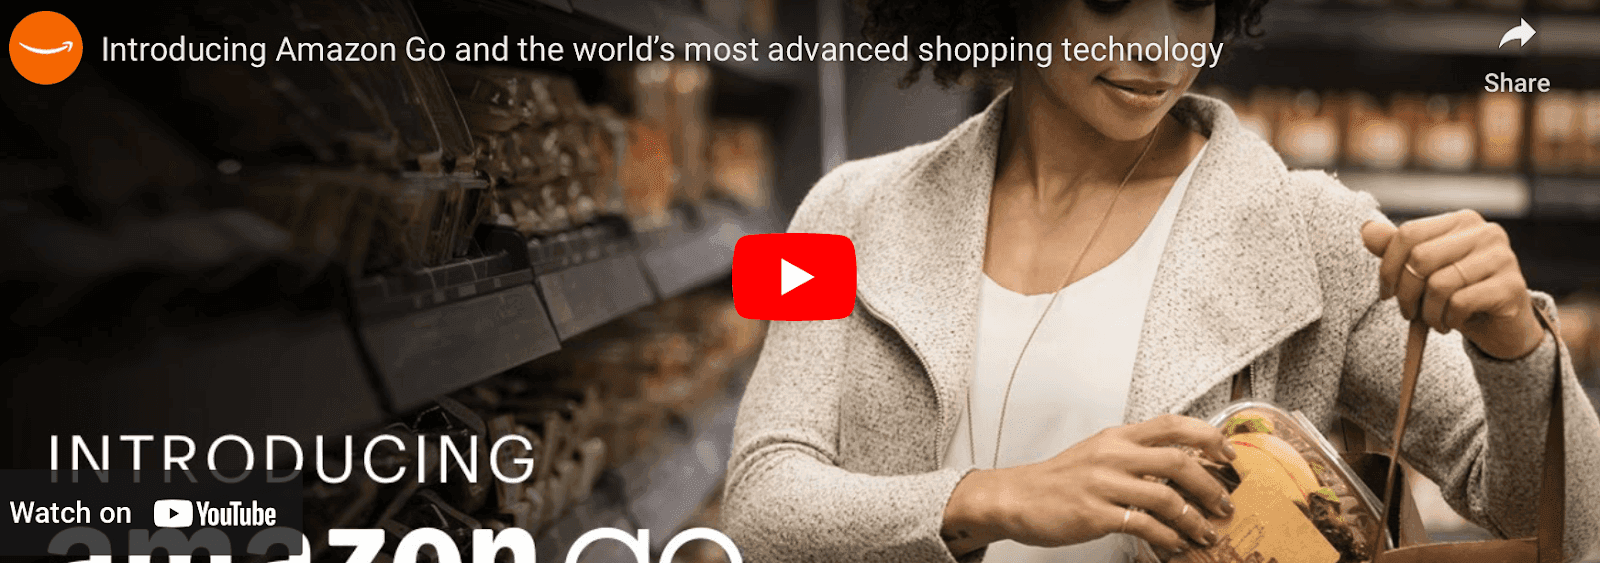 YouTube video preview of Amazon Go introduction